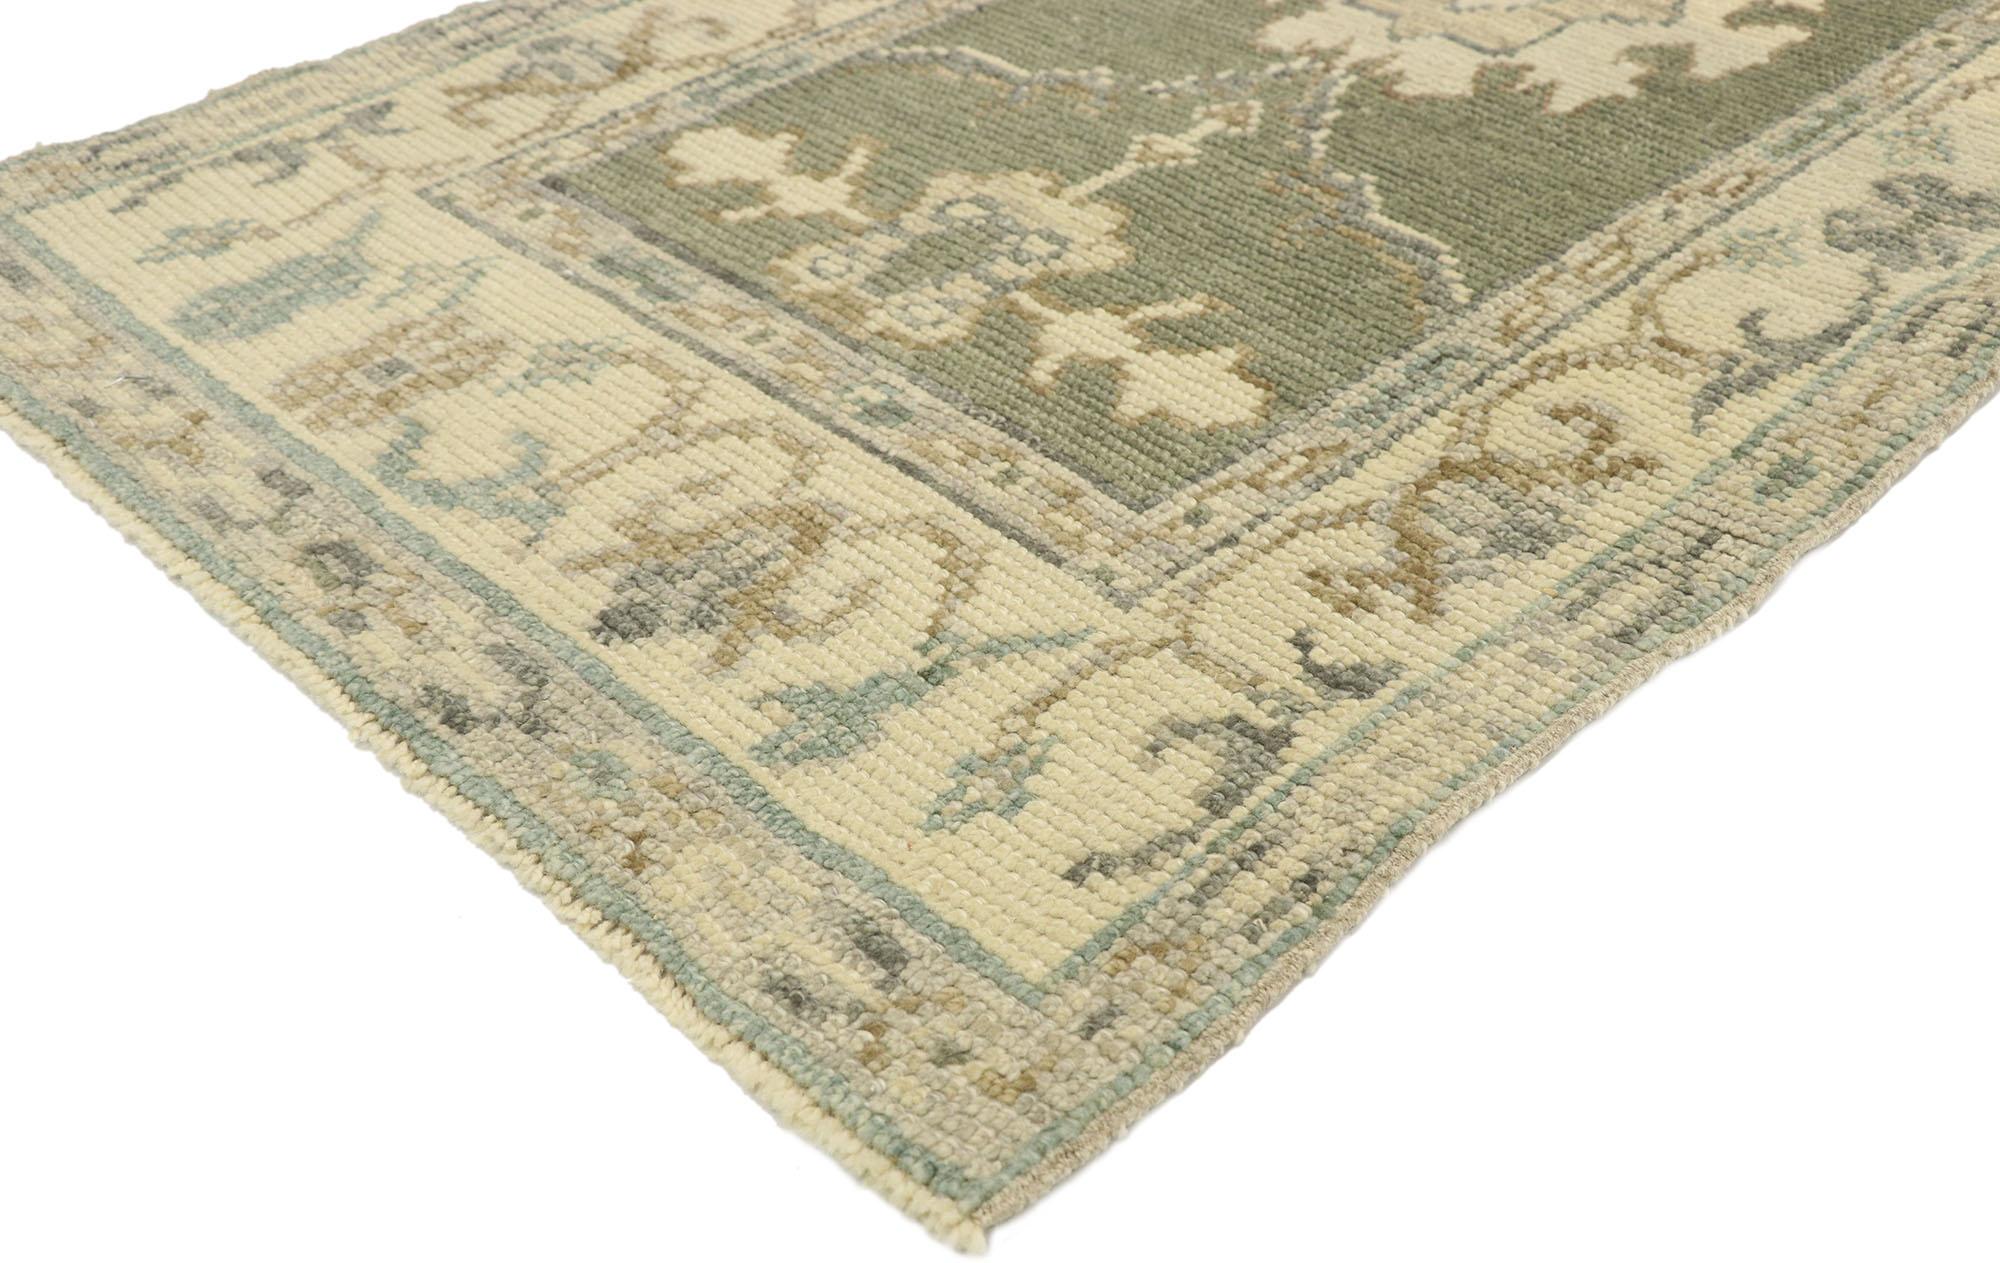 52893 New Contemporary Turkish Oushak runner with Modern Transitional style. Blending elements from the modern world with subtle earth-tone hues, this hand knotted wool contemporary Turkish Oushak runner will boost the coziness factor in nearly any